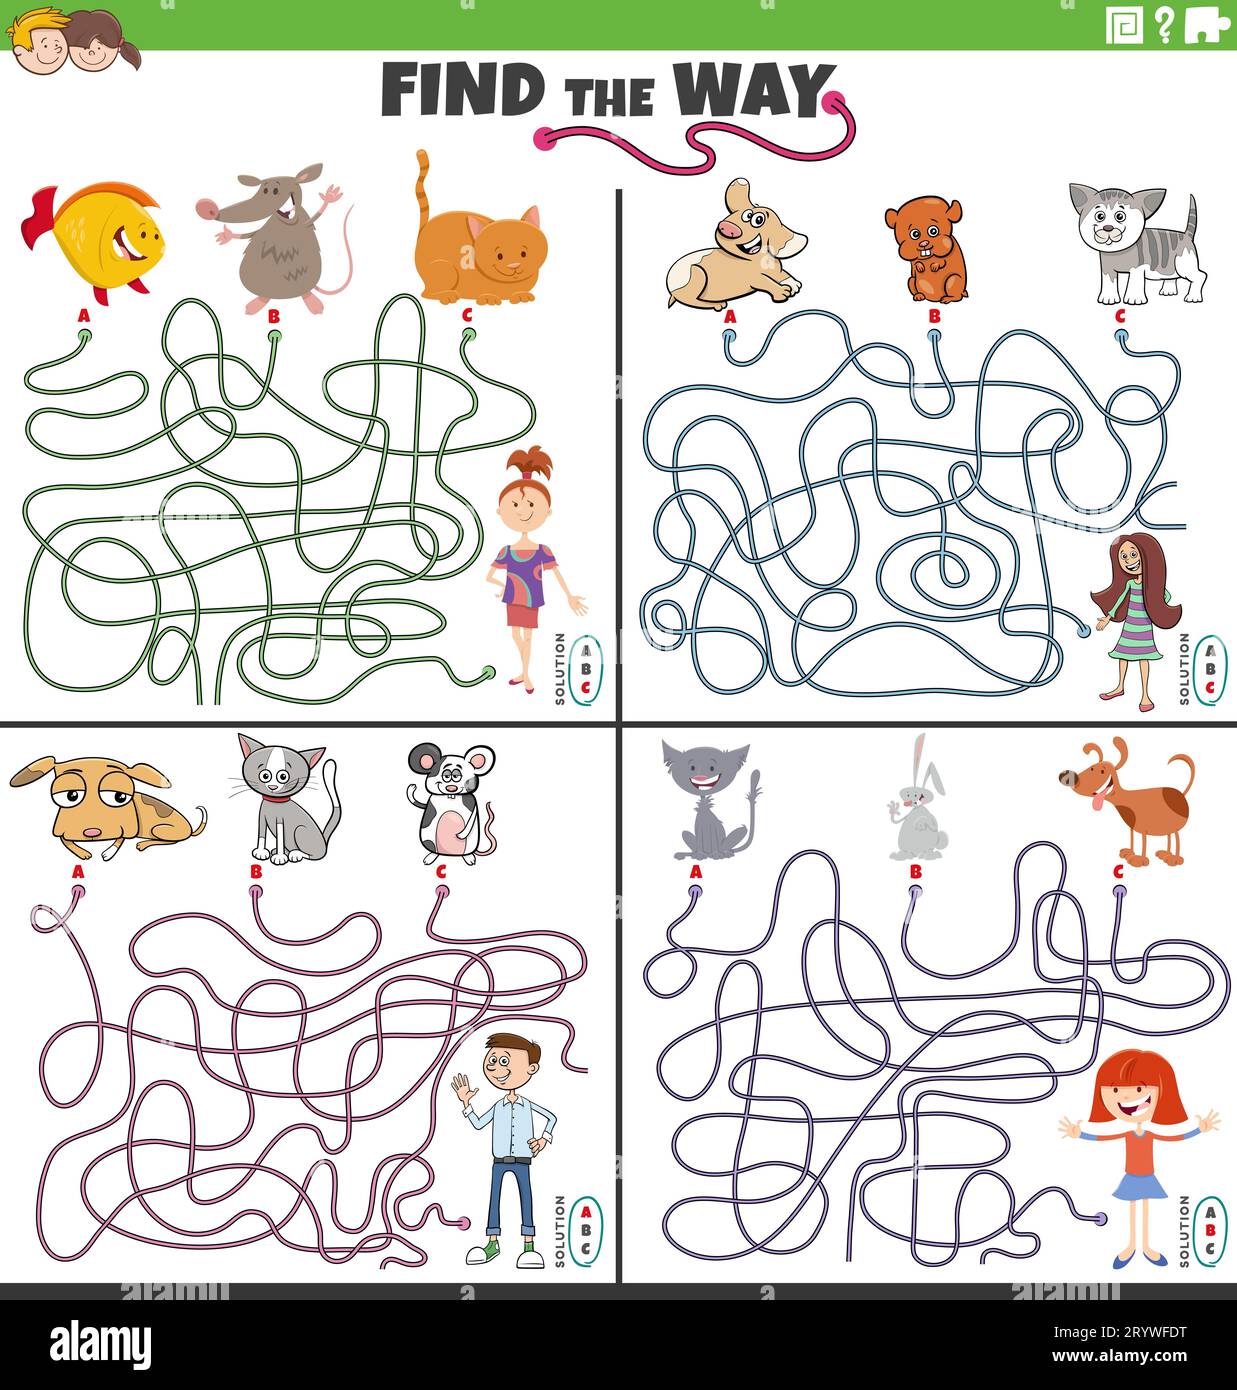 Cartoon illustration of find the way maze puzzle games set with comic children characters and pets Stock Photo